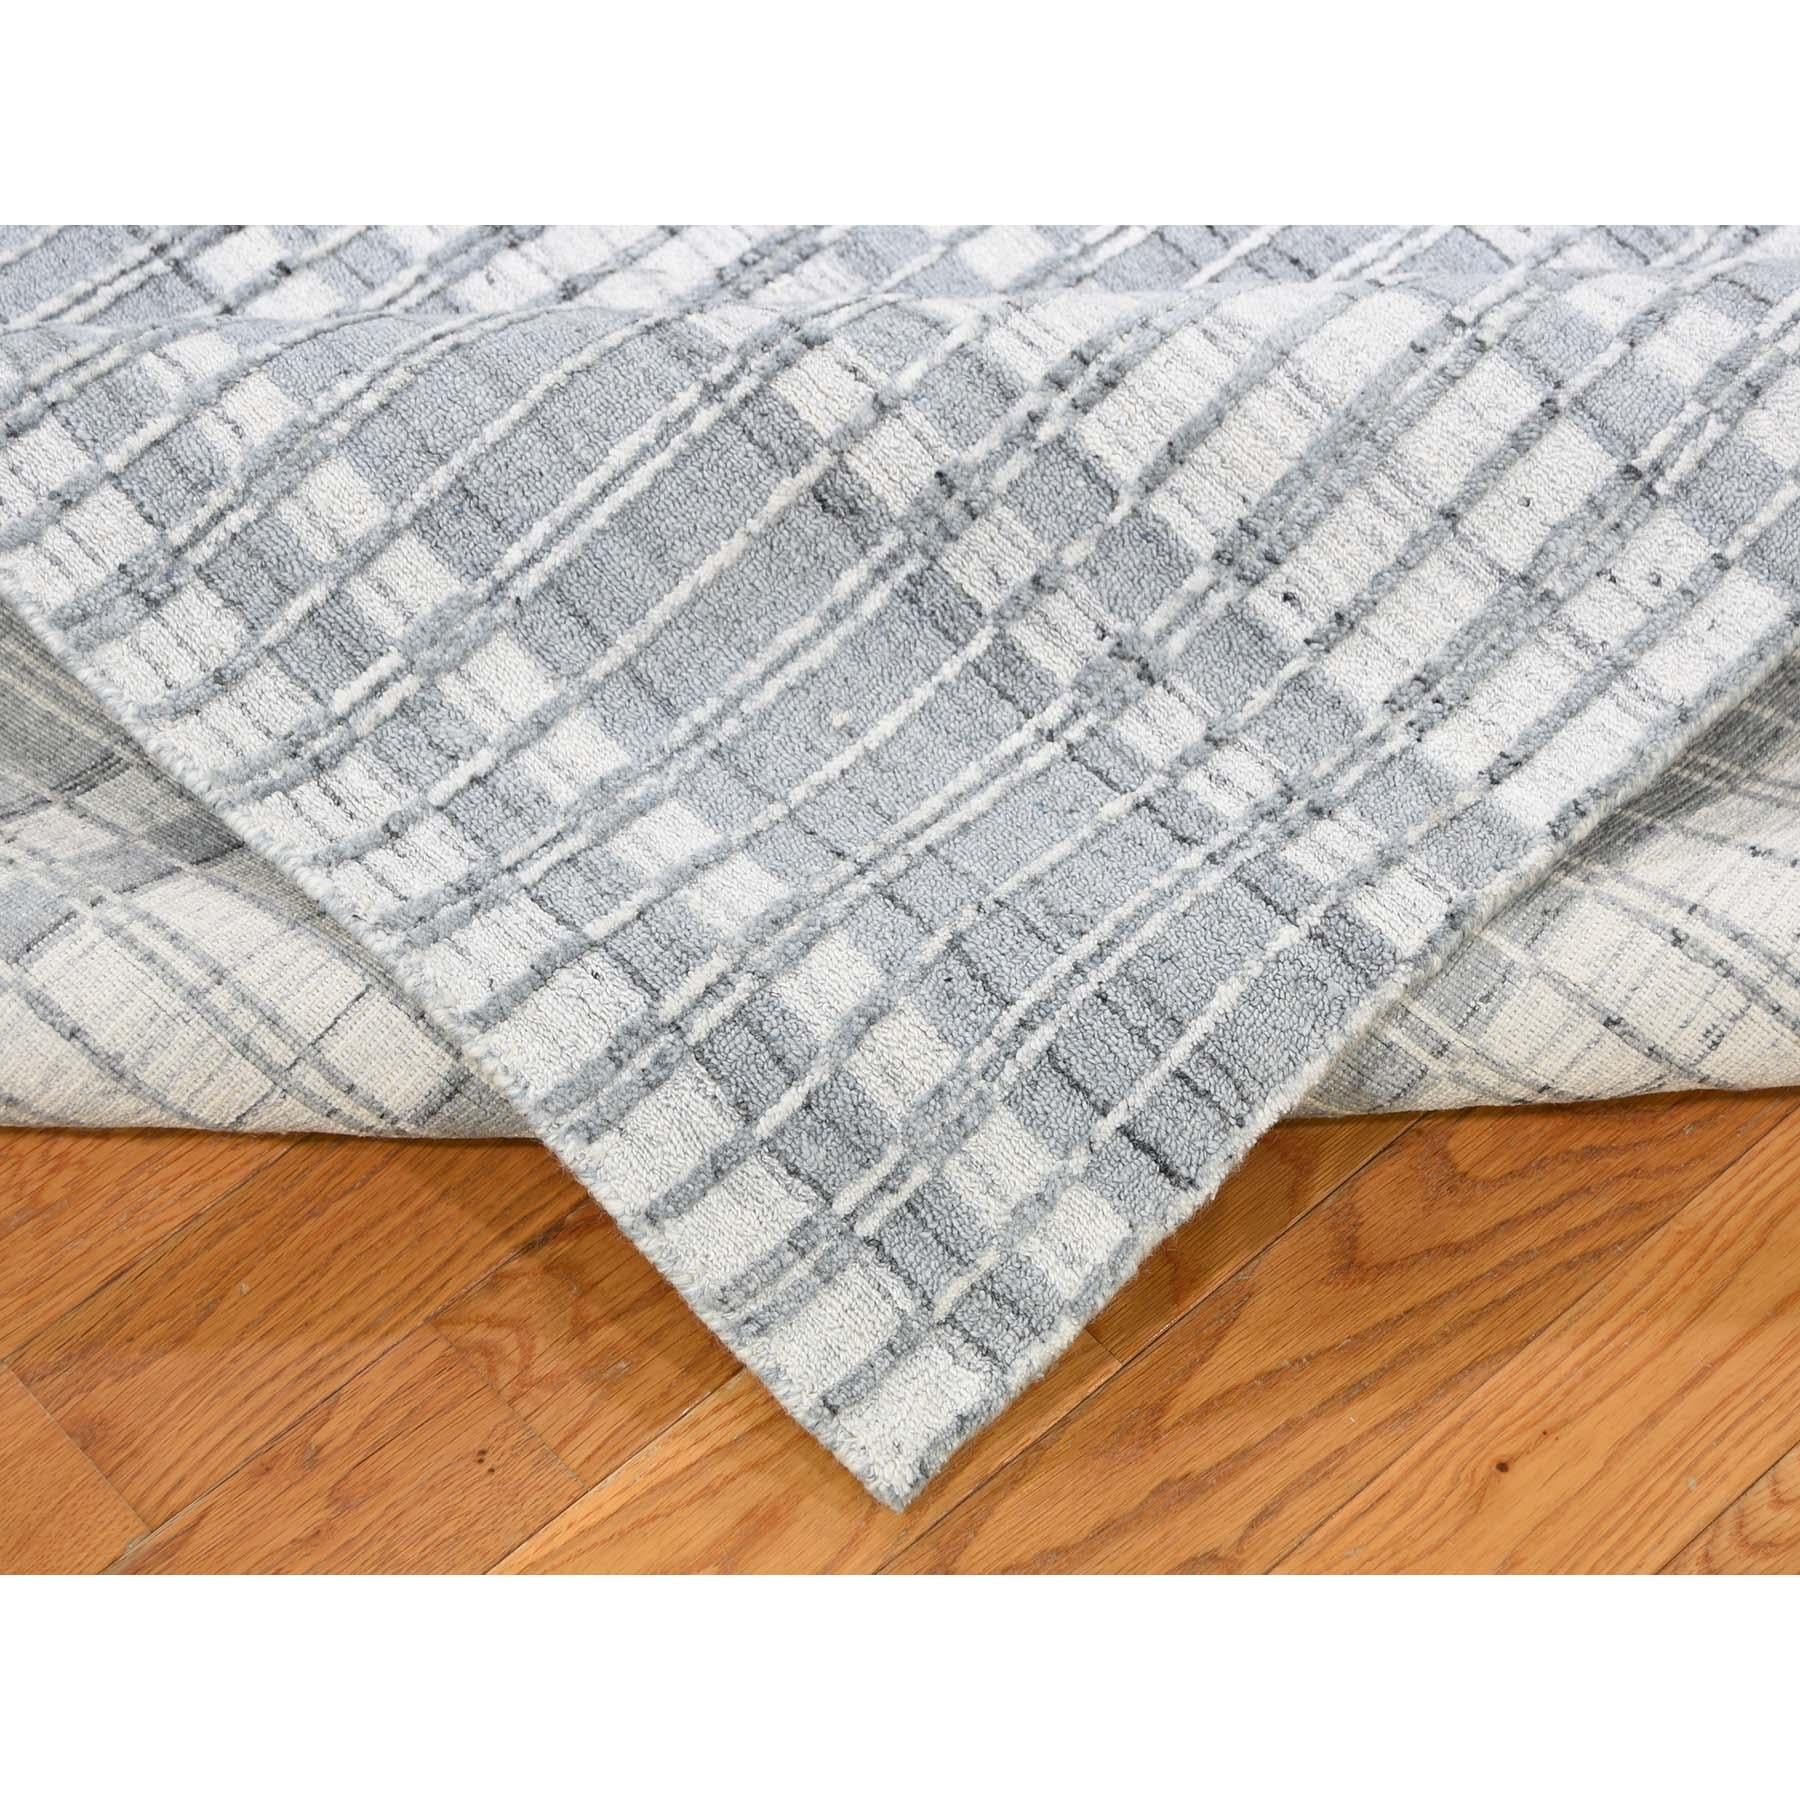 Contemporary Hi Lo Pile Pure Wool Tone On Tone Hand-Loomed Oriental Rug